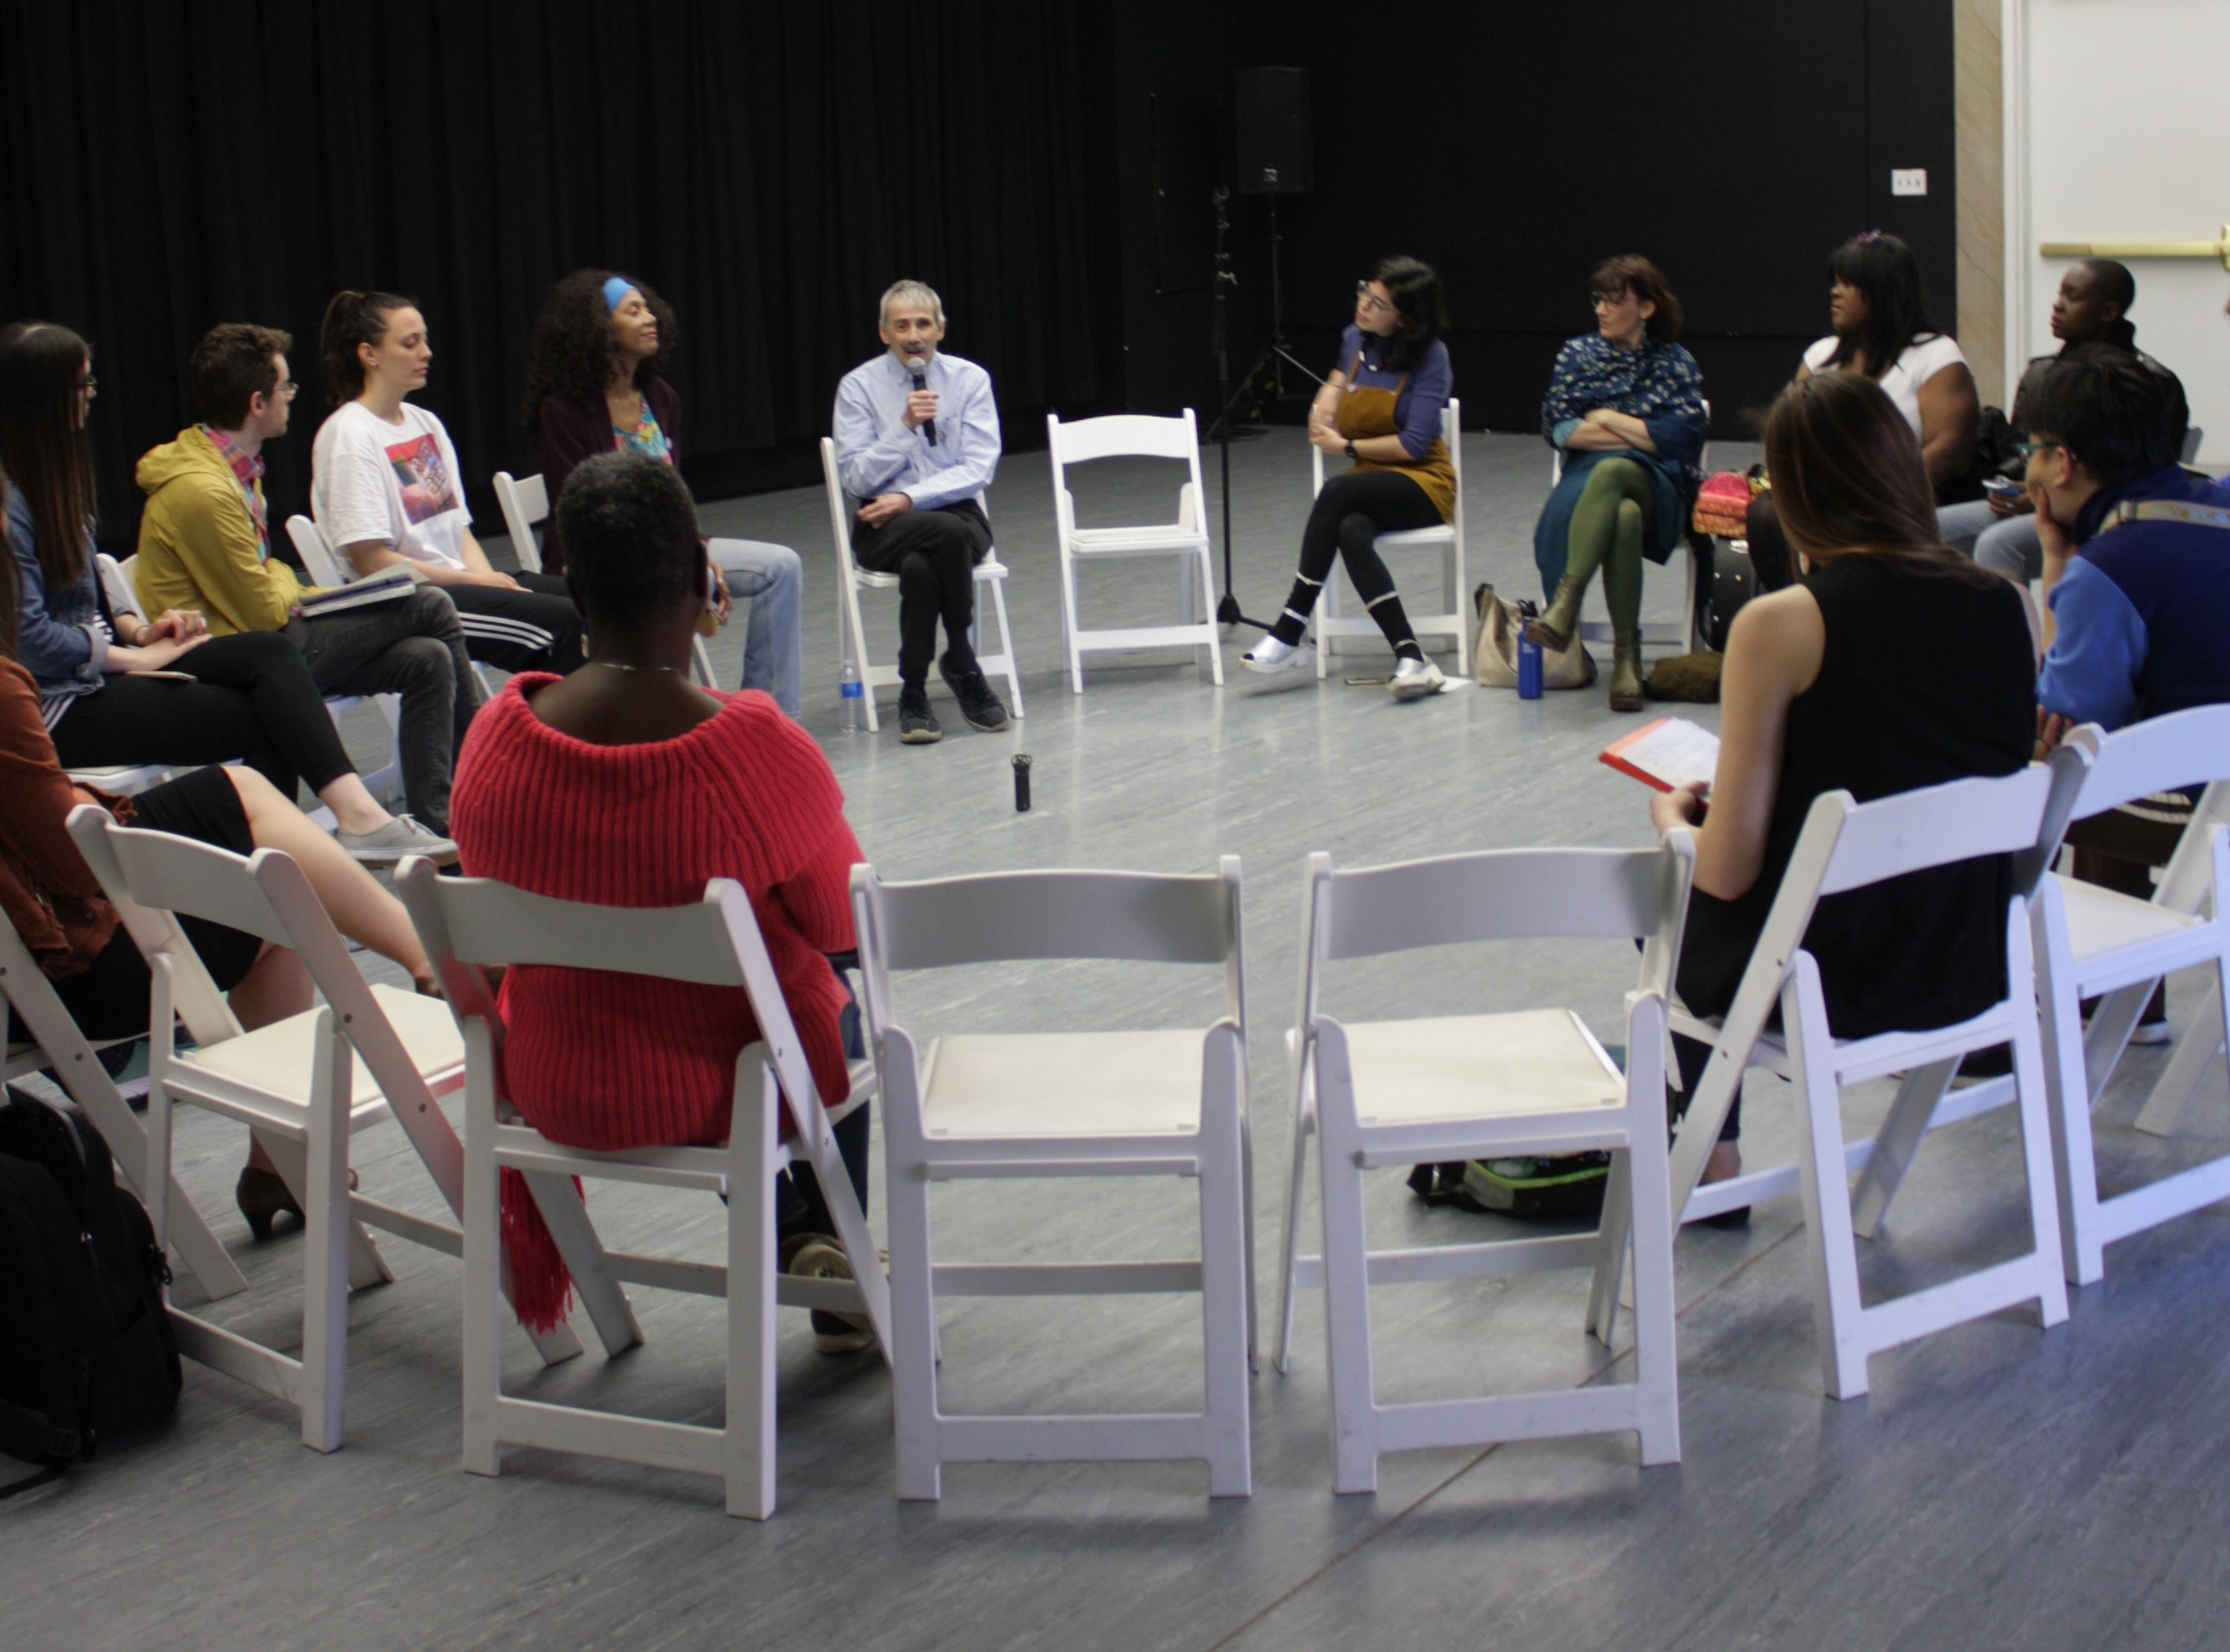 Featured image: This is a photograph of a group of people in a dance studio, sitting in a circle of chairs. Some people have their backs to the camera, and other people are shown straight-on or in profile. The two chairs nearest the camera are unoccupied, creating a window to the speaker, a man holding a microphone. Photograph by Hannah Siegfried.